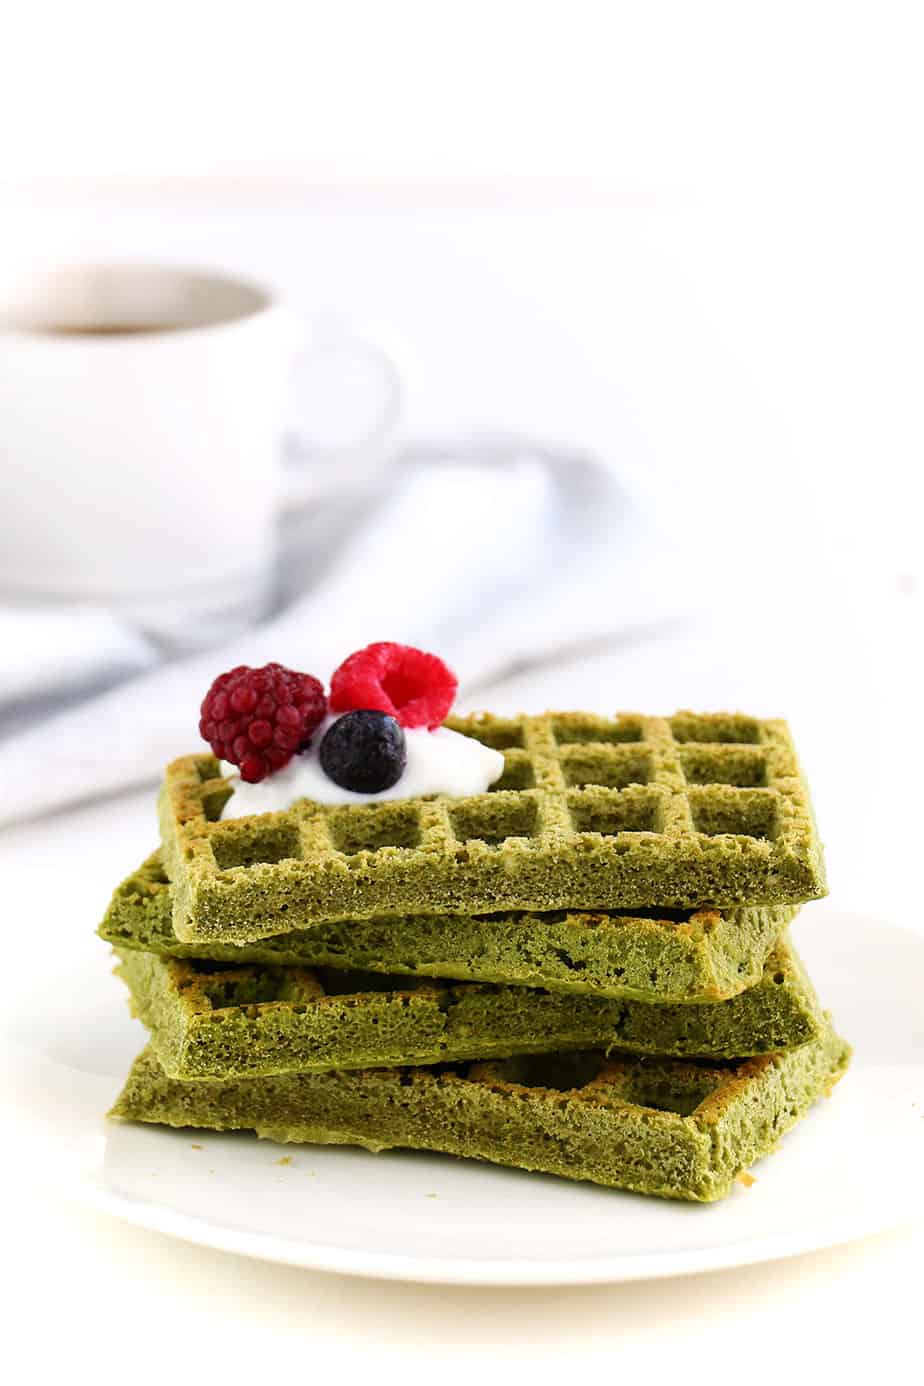 Matcha Gluten Free Waffles - A easy to make breakfast option with the delicious and healthy flavours of matcha.